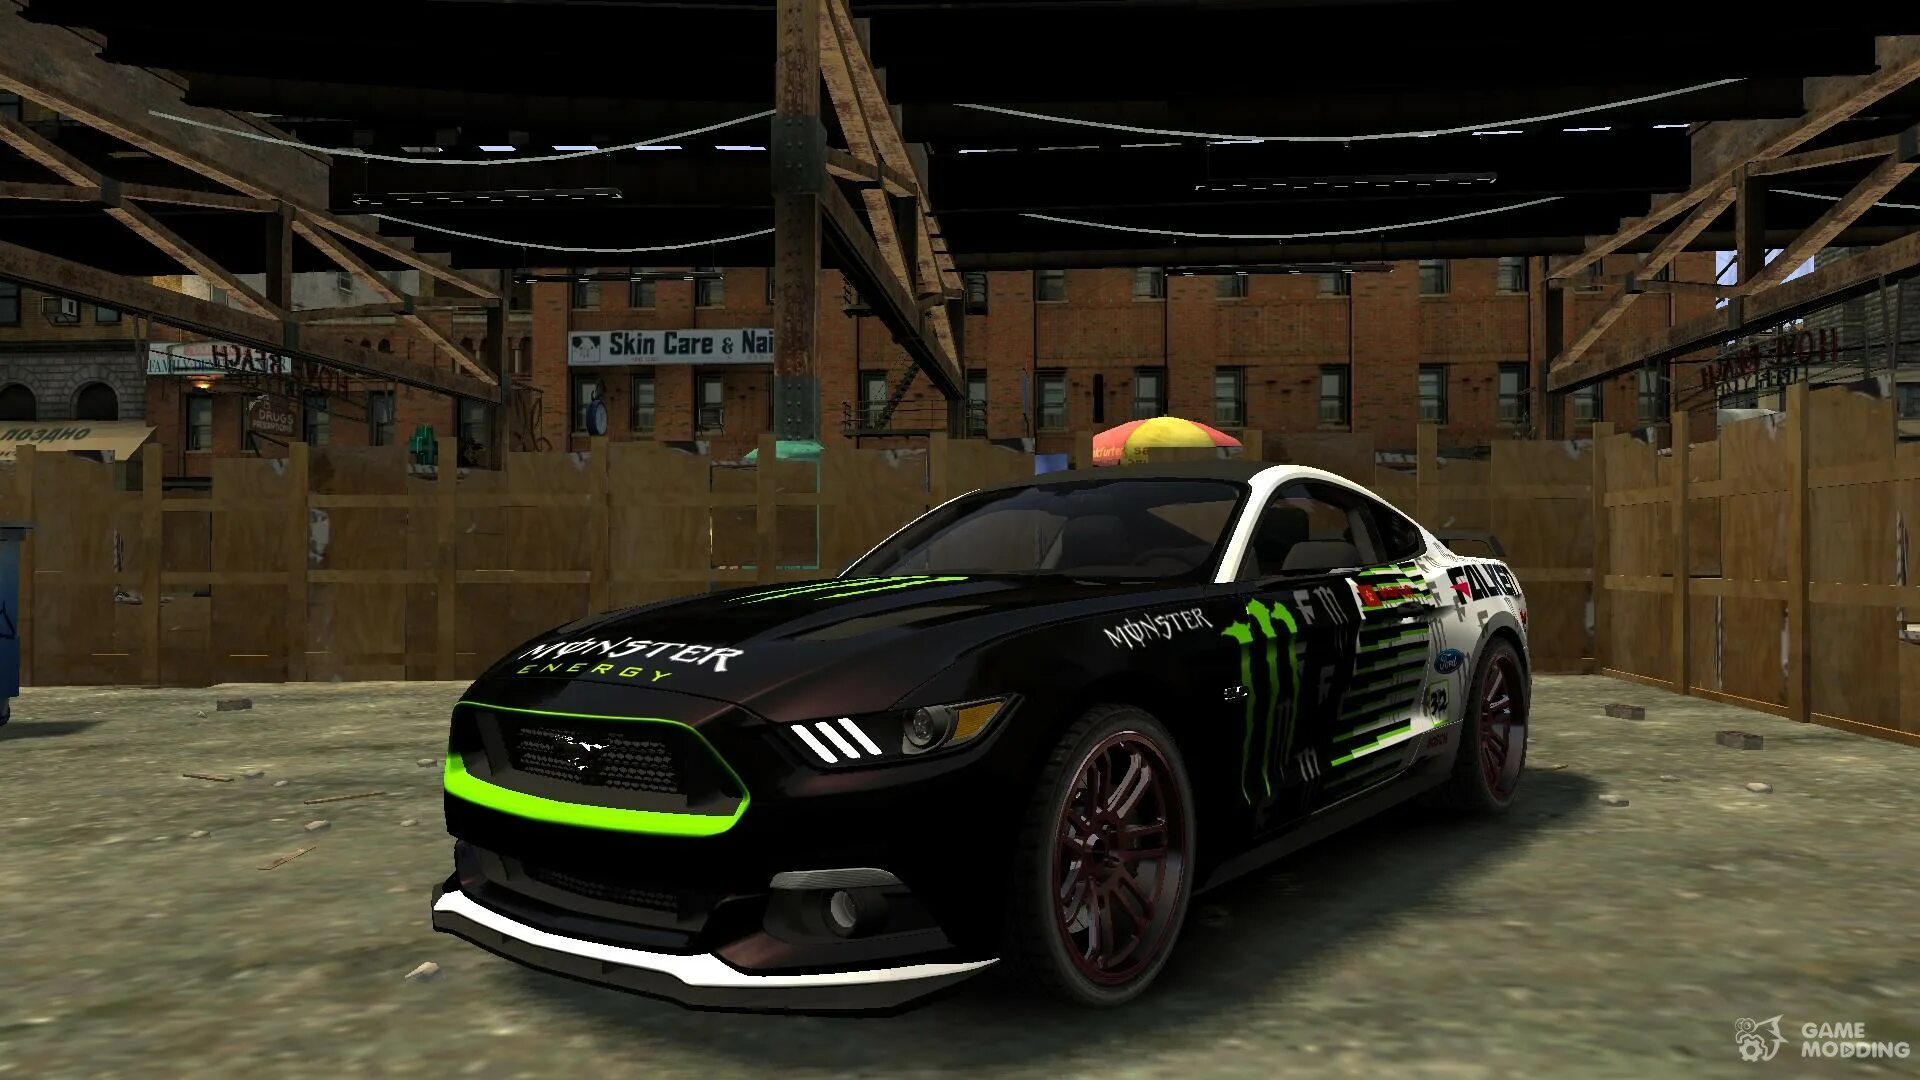 Ford Mustang Monster Energy 2015. Ford Mustang gt Monster Energy. Ford Mustang Monster Energy в Мэдаут 2. Винилы на Мустанг в мадаут.